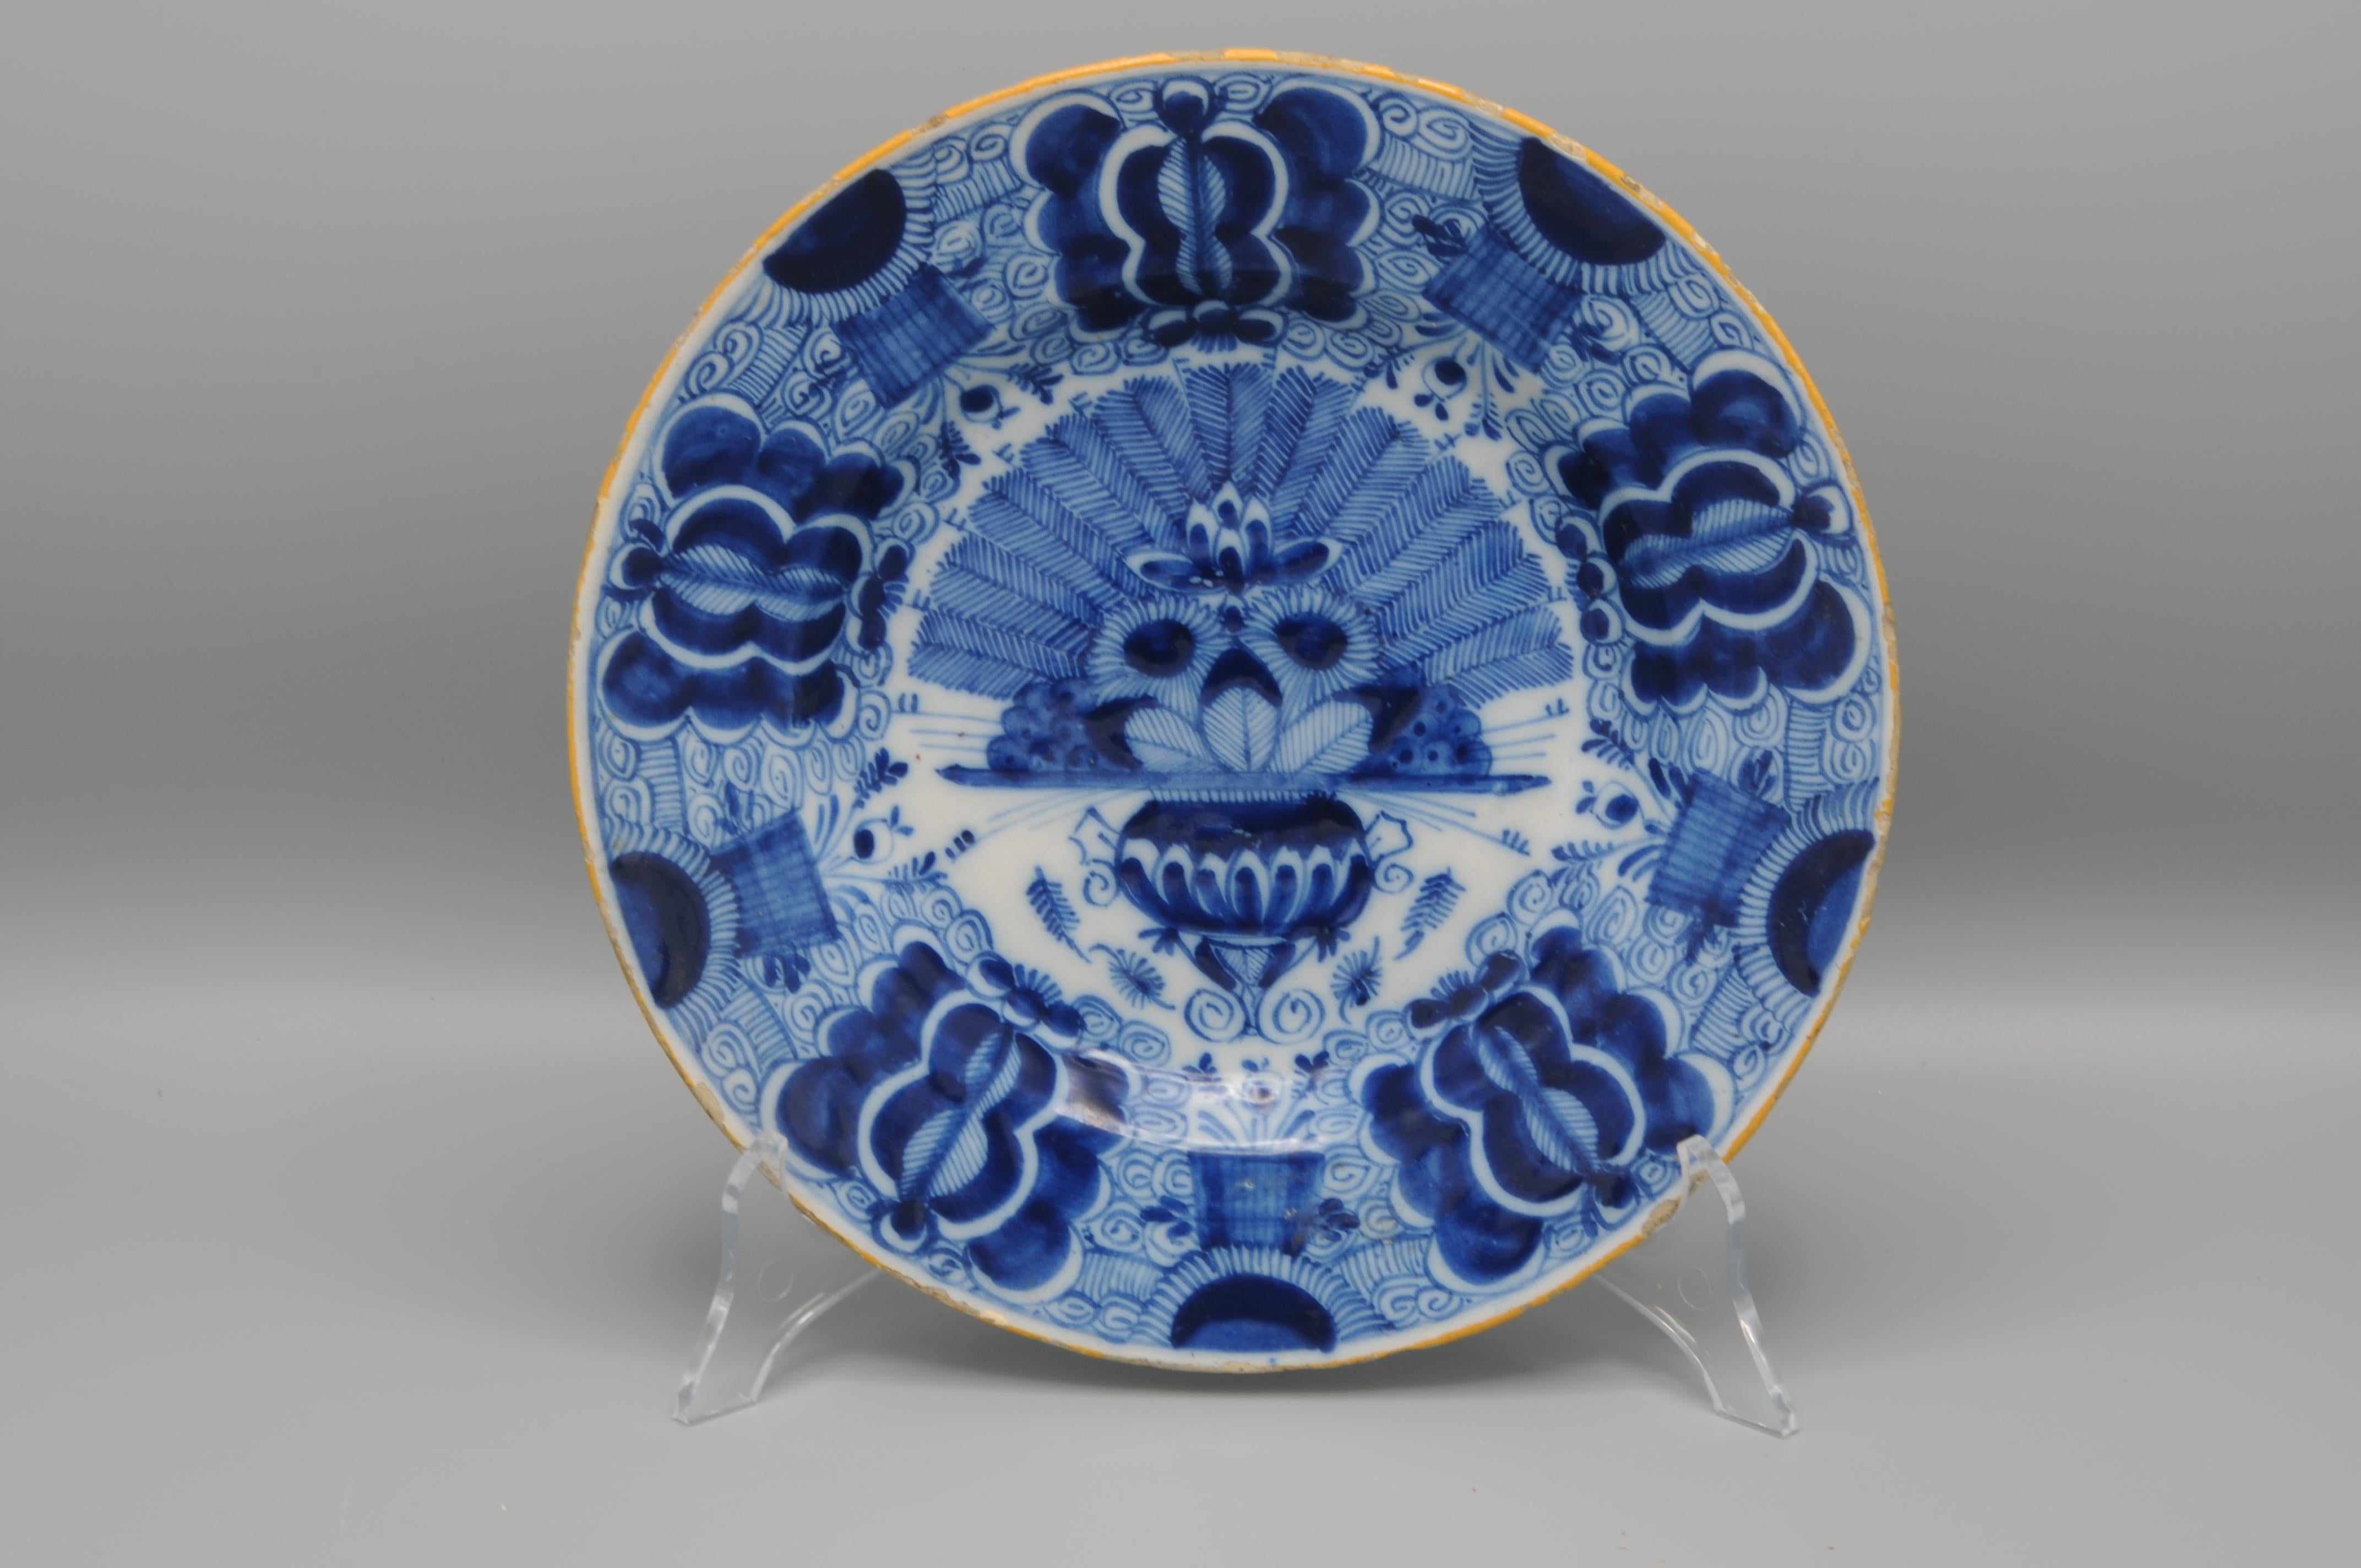 Dutch Delft blue and white 'Peacock' plate, 18th century, with ochre rim, the center decorated in cobalt with a vase containing an arrangement of peacock feathers and flowers. The rim decorated with stylized flower heads against a scrolling